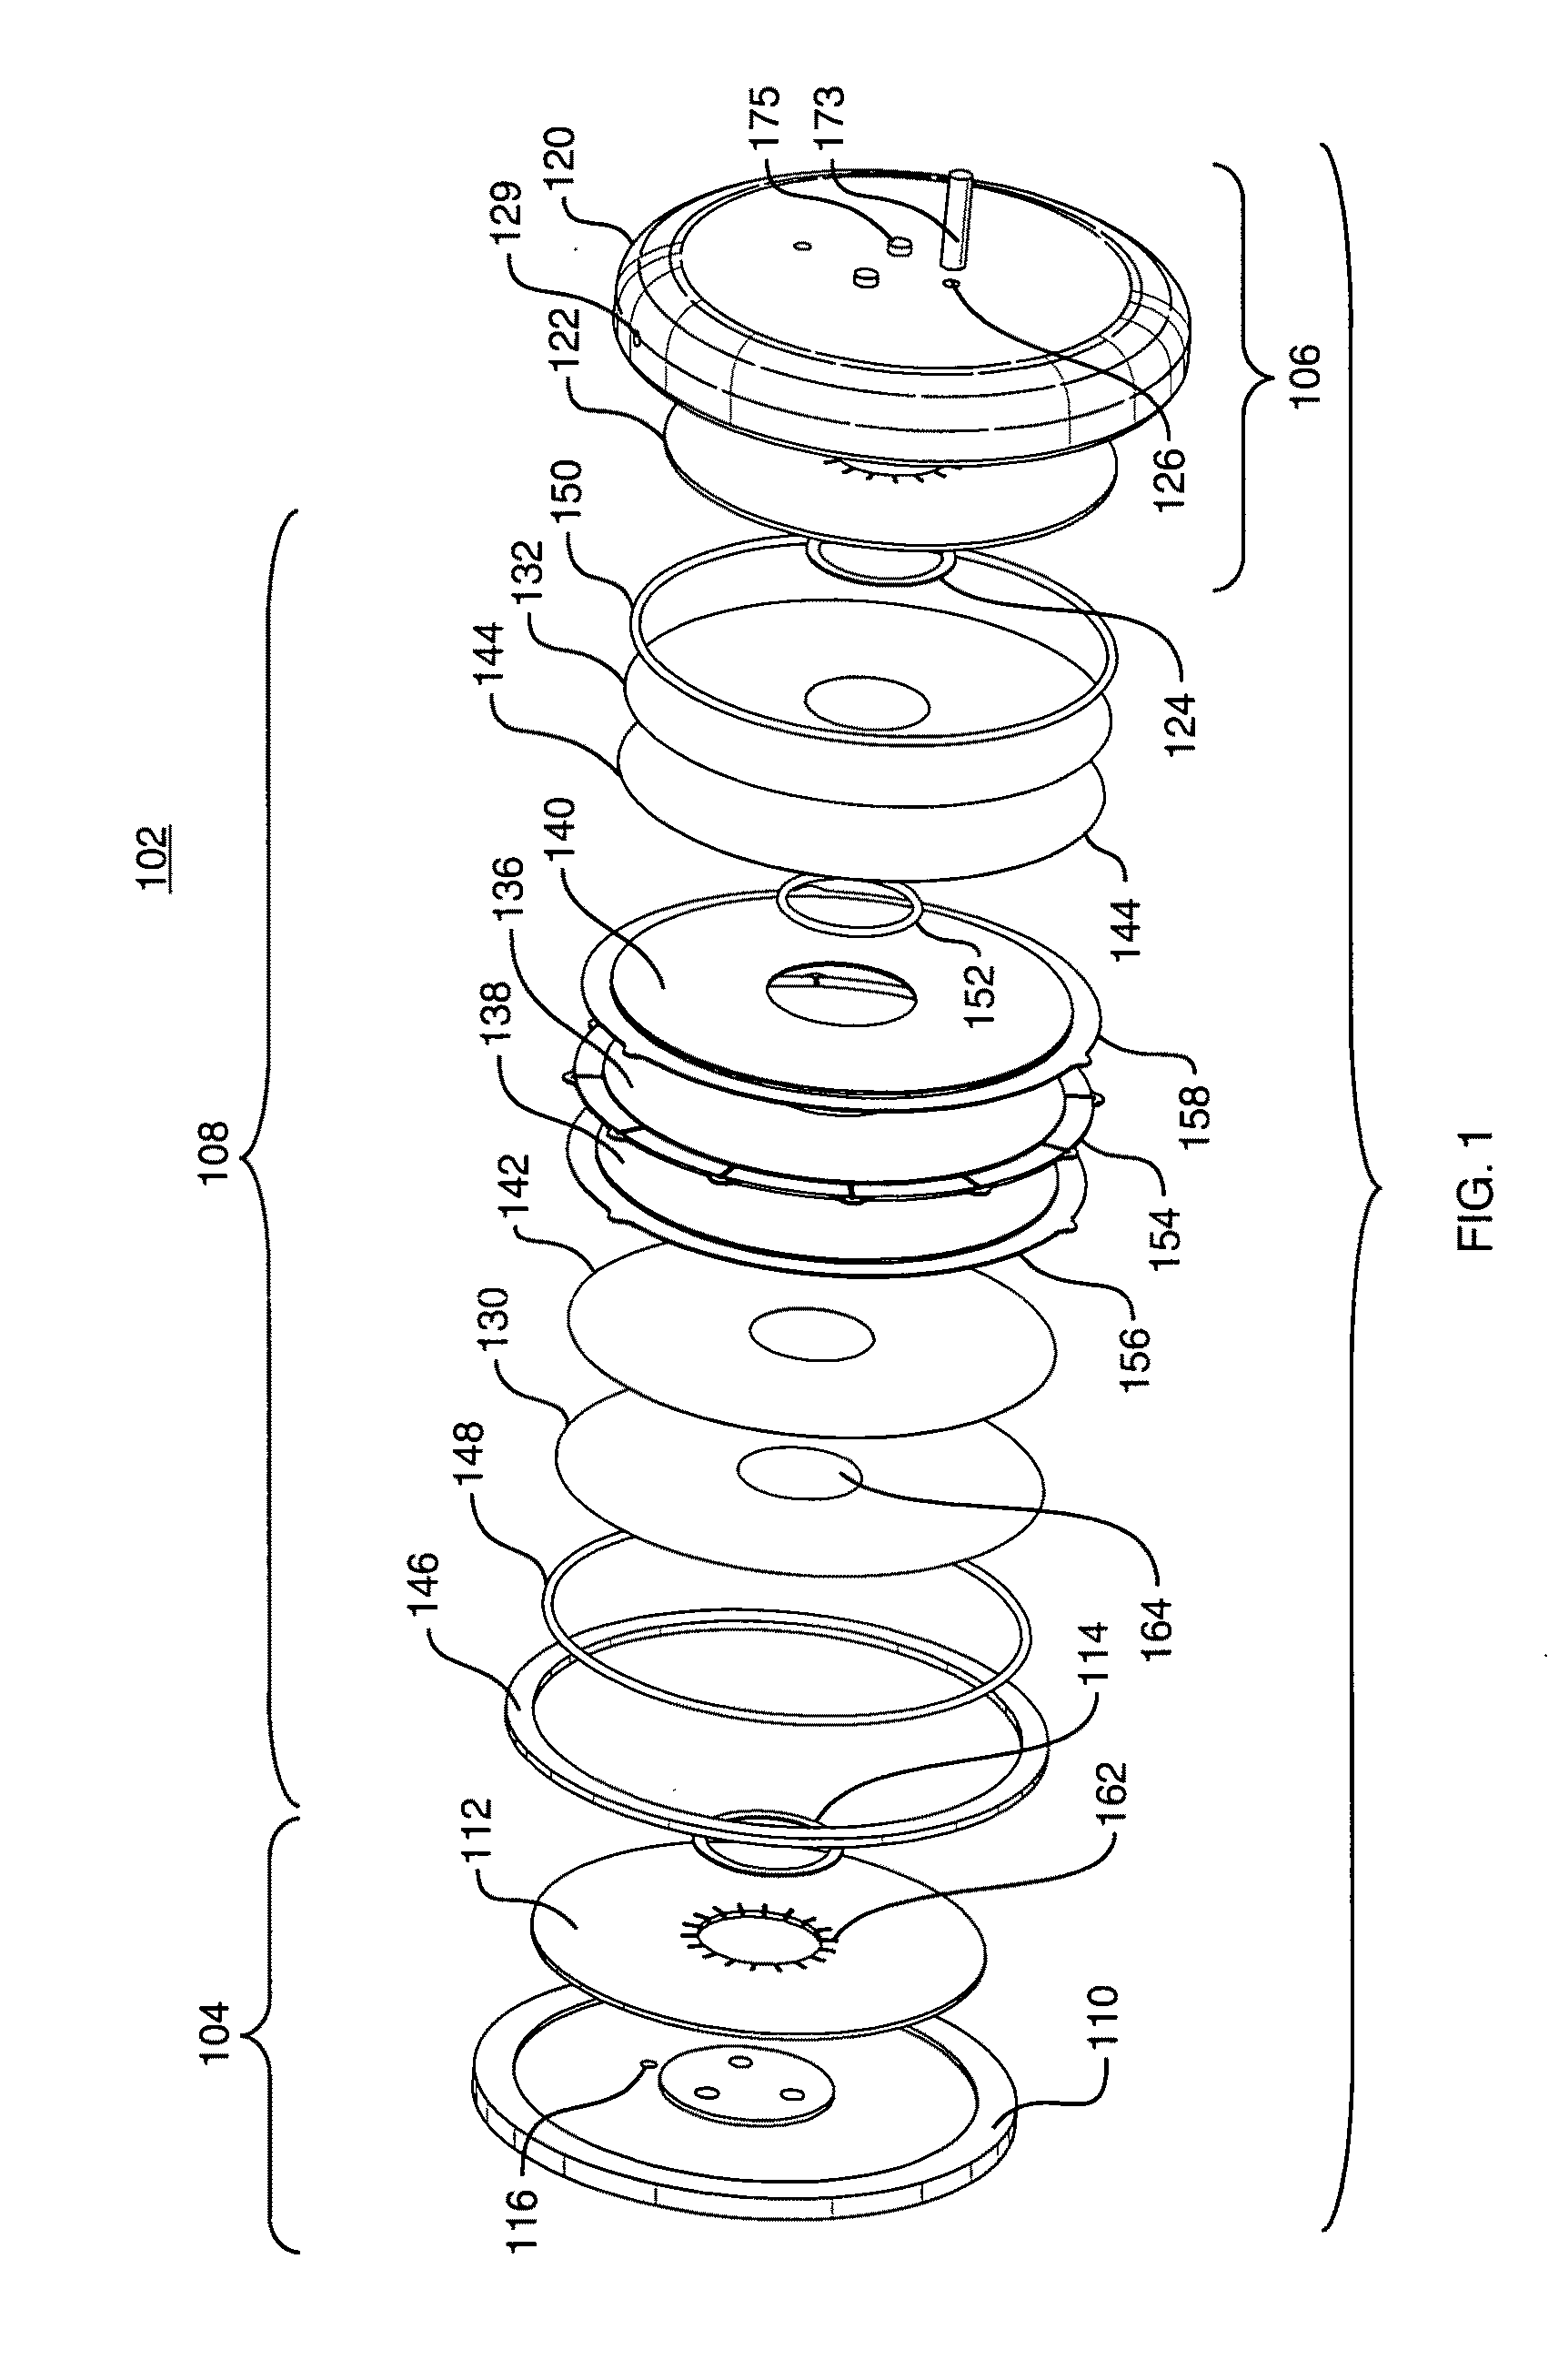 Membrane support module for permeate separation in a fuel cell